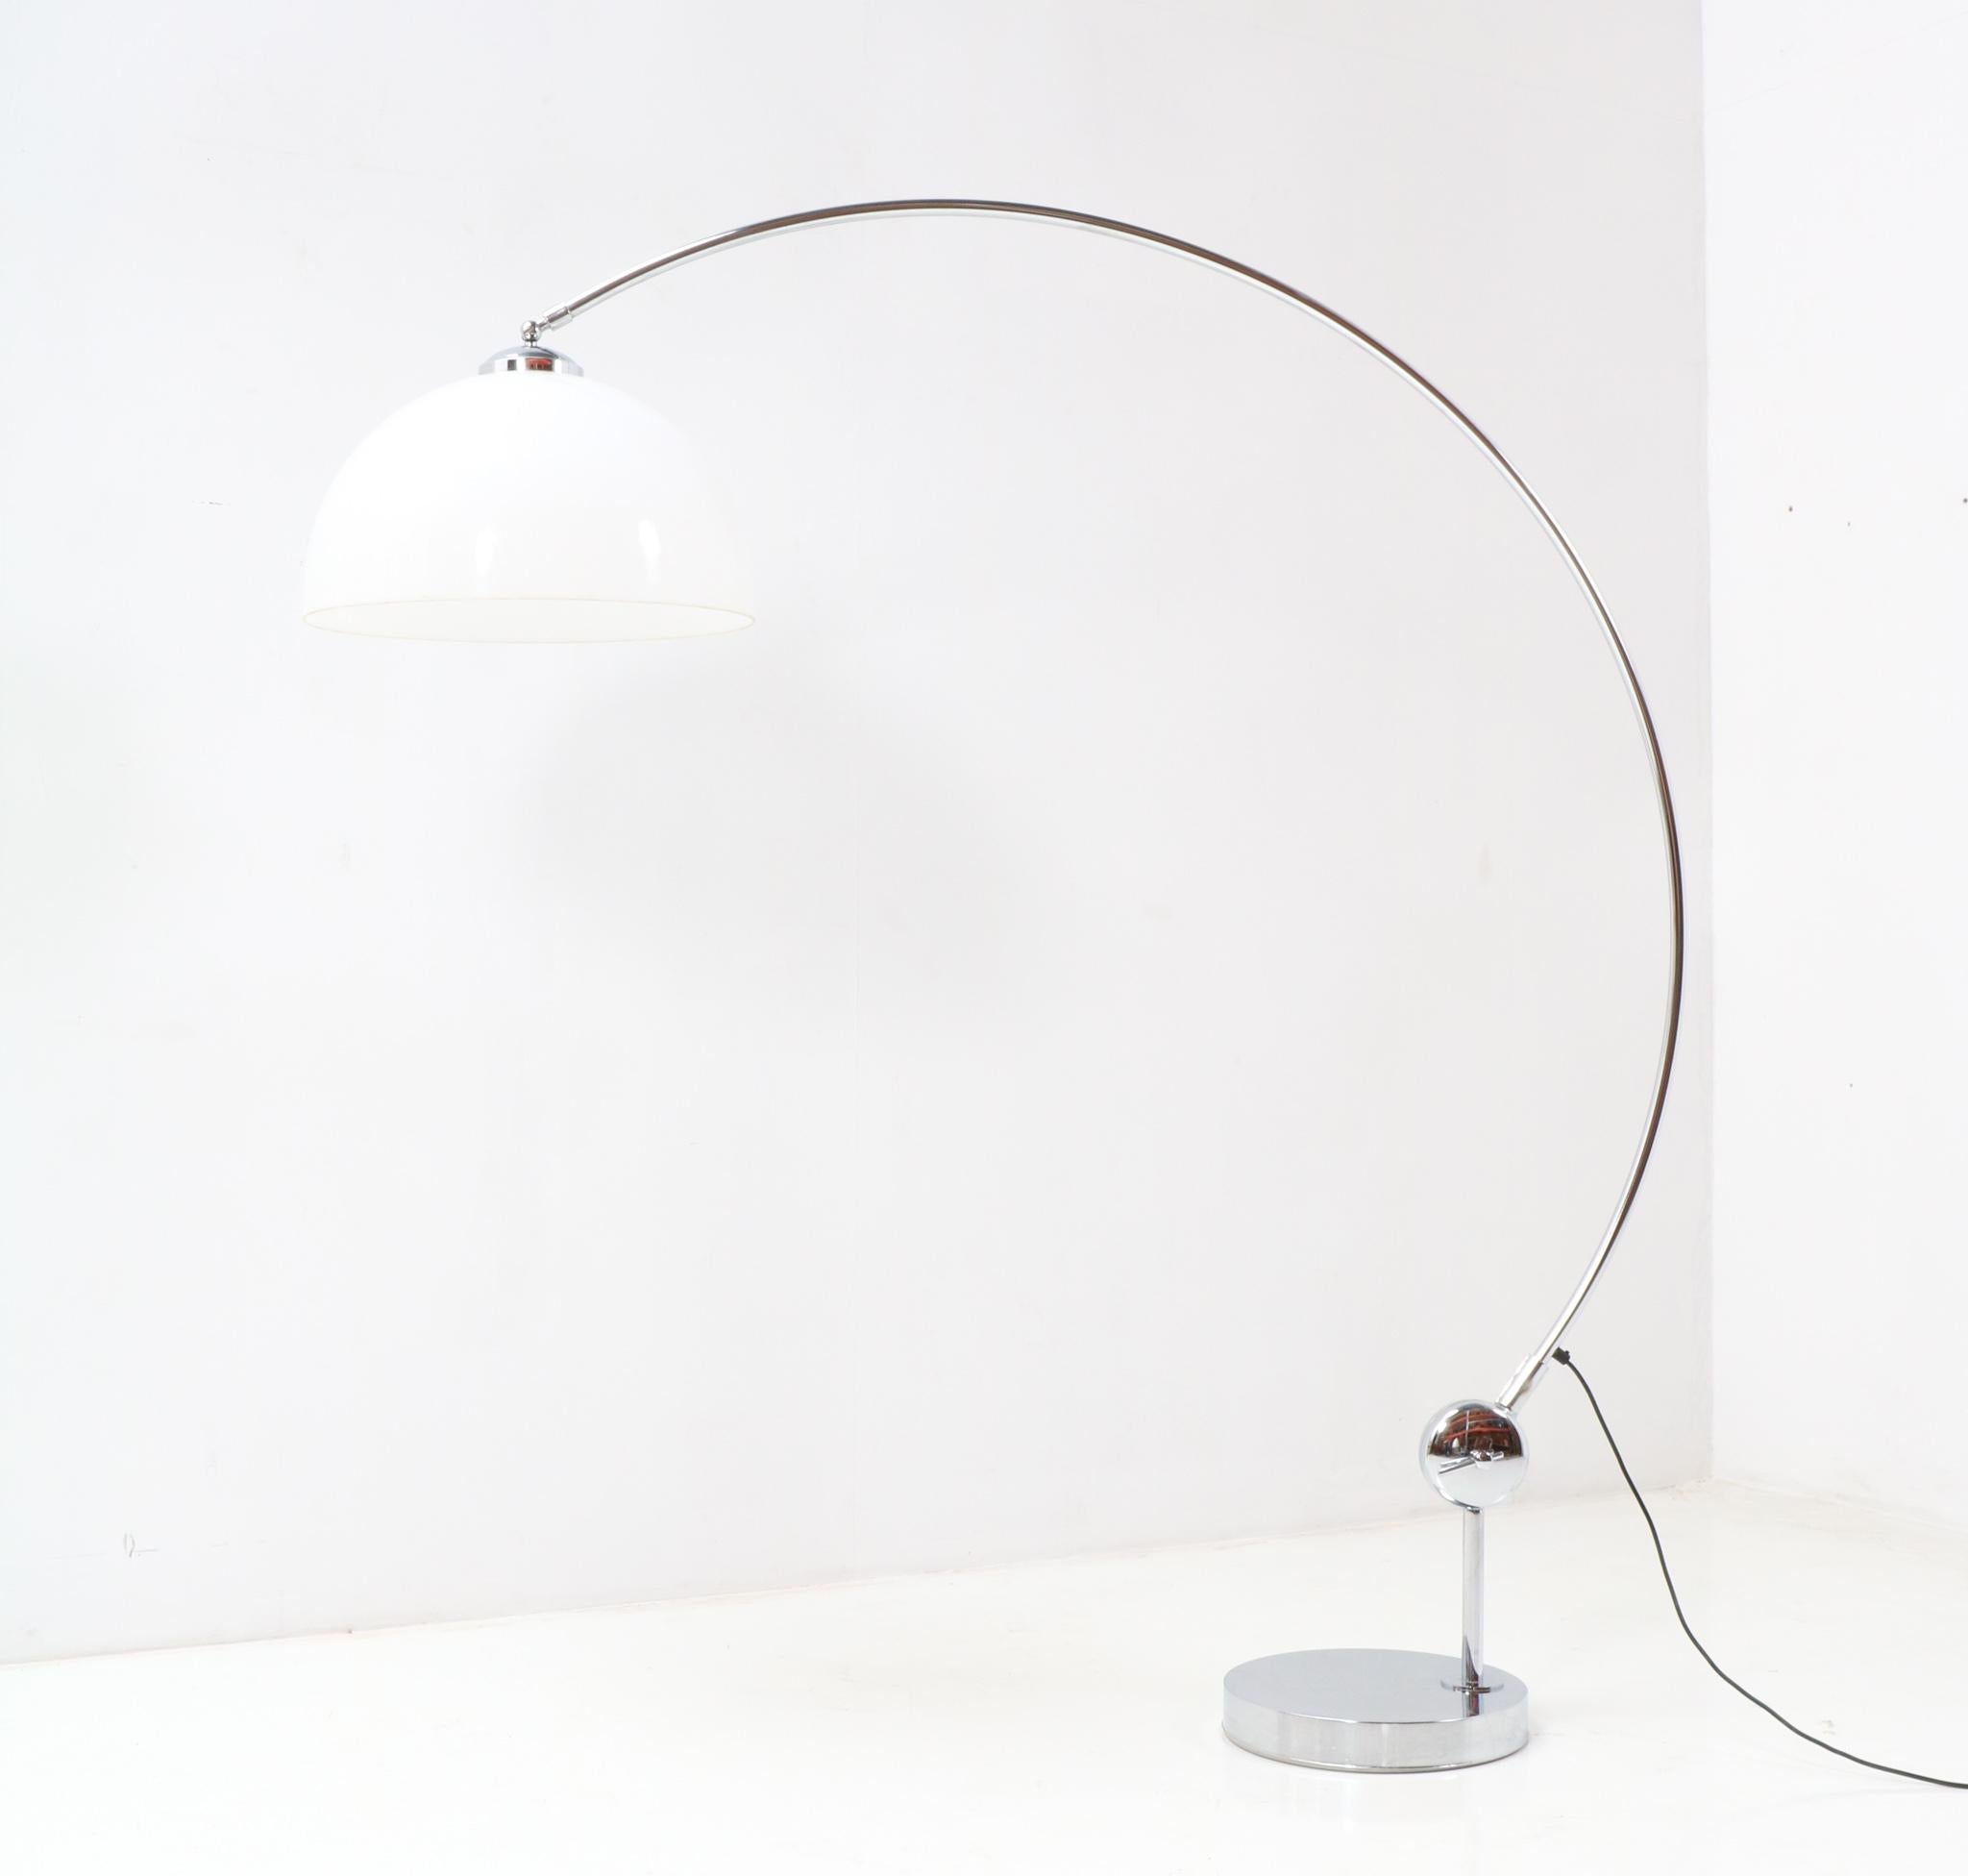 Stunning Mid-Century Modern Arc floor lamp.
Striking French design from the 1970s.
Tubular chrome arc with a white acrylic globe shade.
This wonderful Mid-Century Modern arc floor lamp is also adjustable in height!
In good original condition